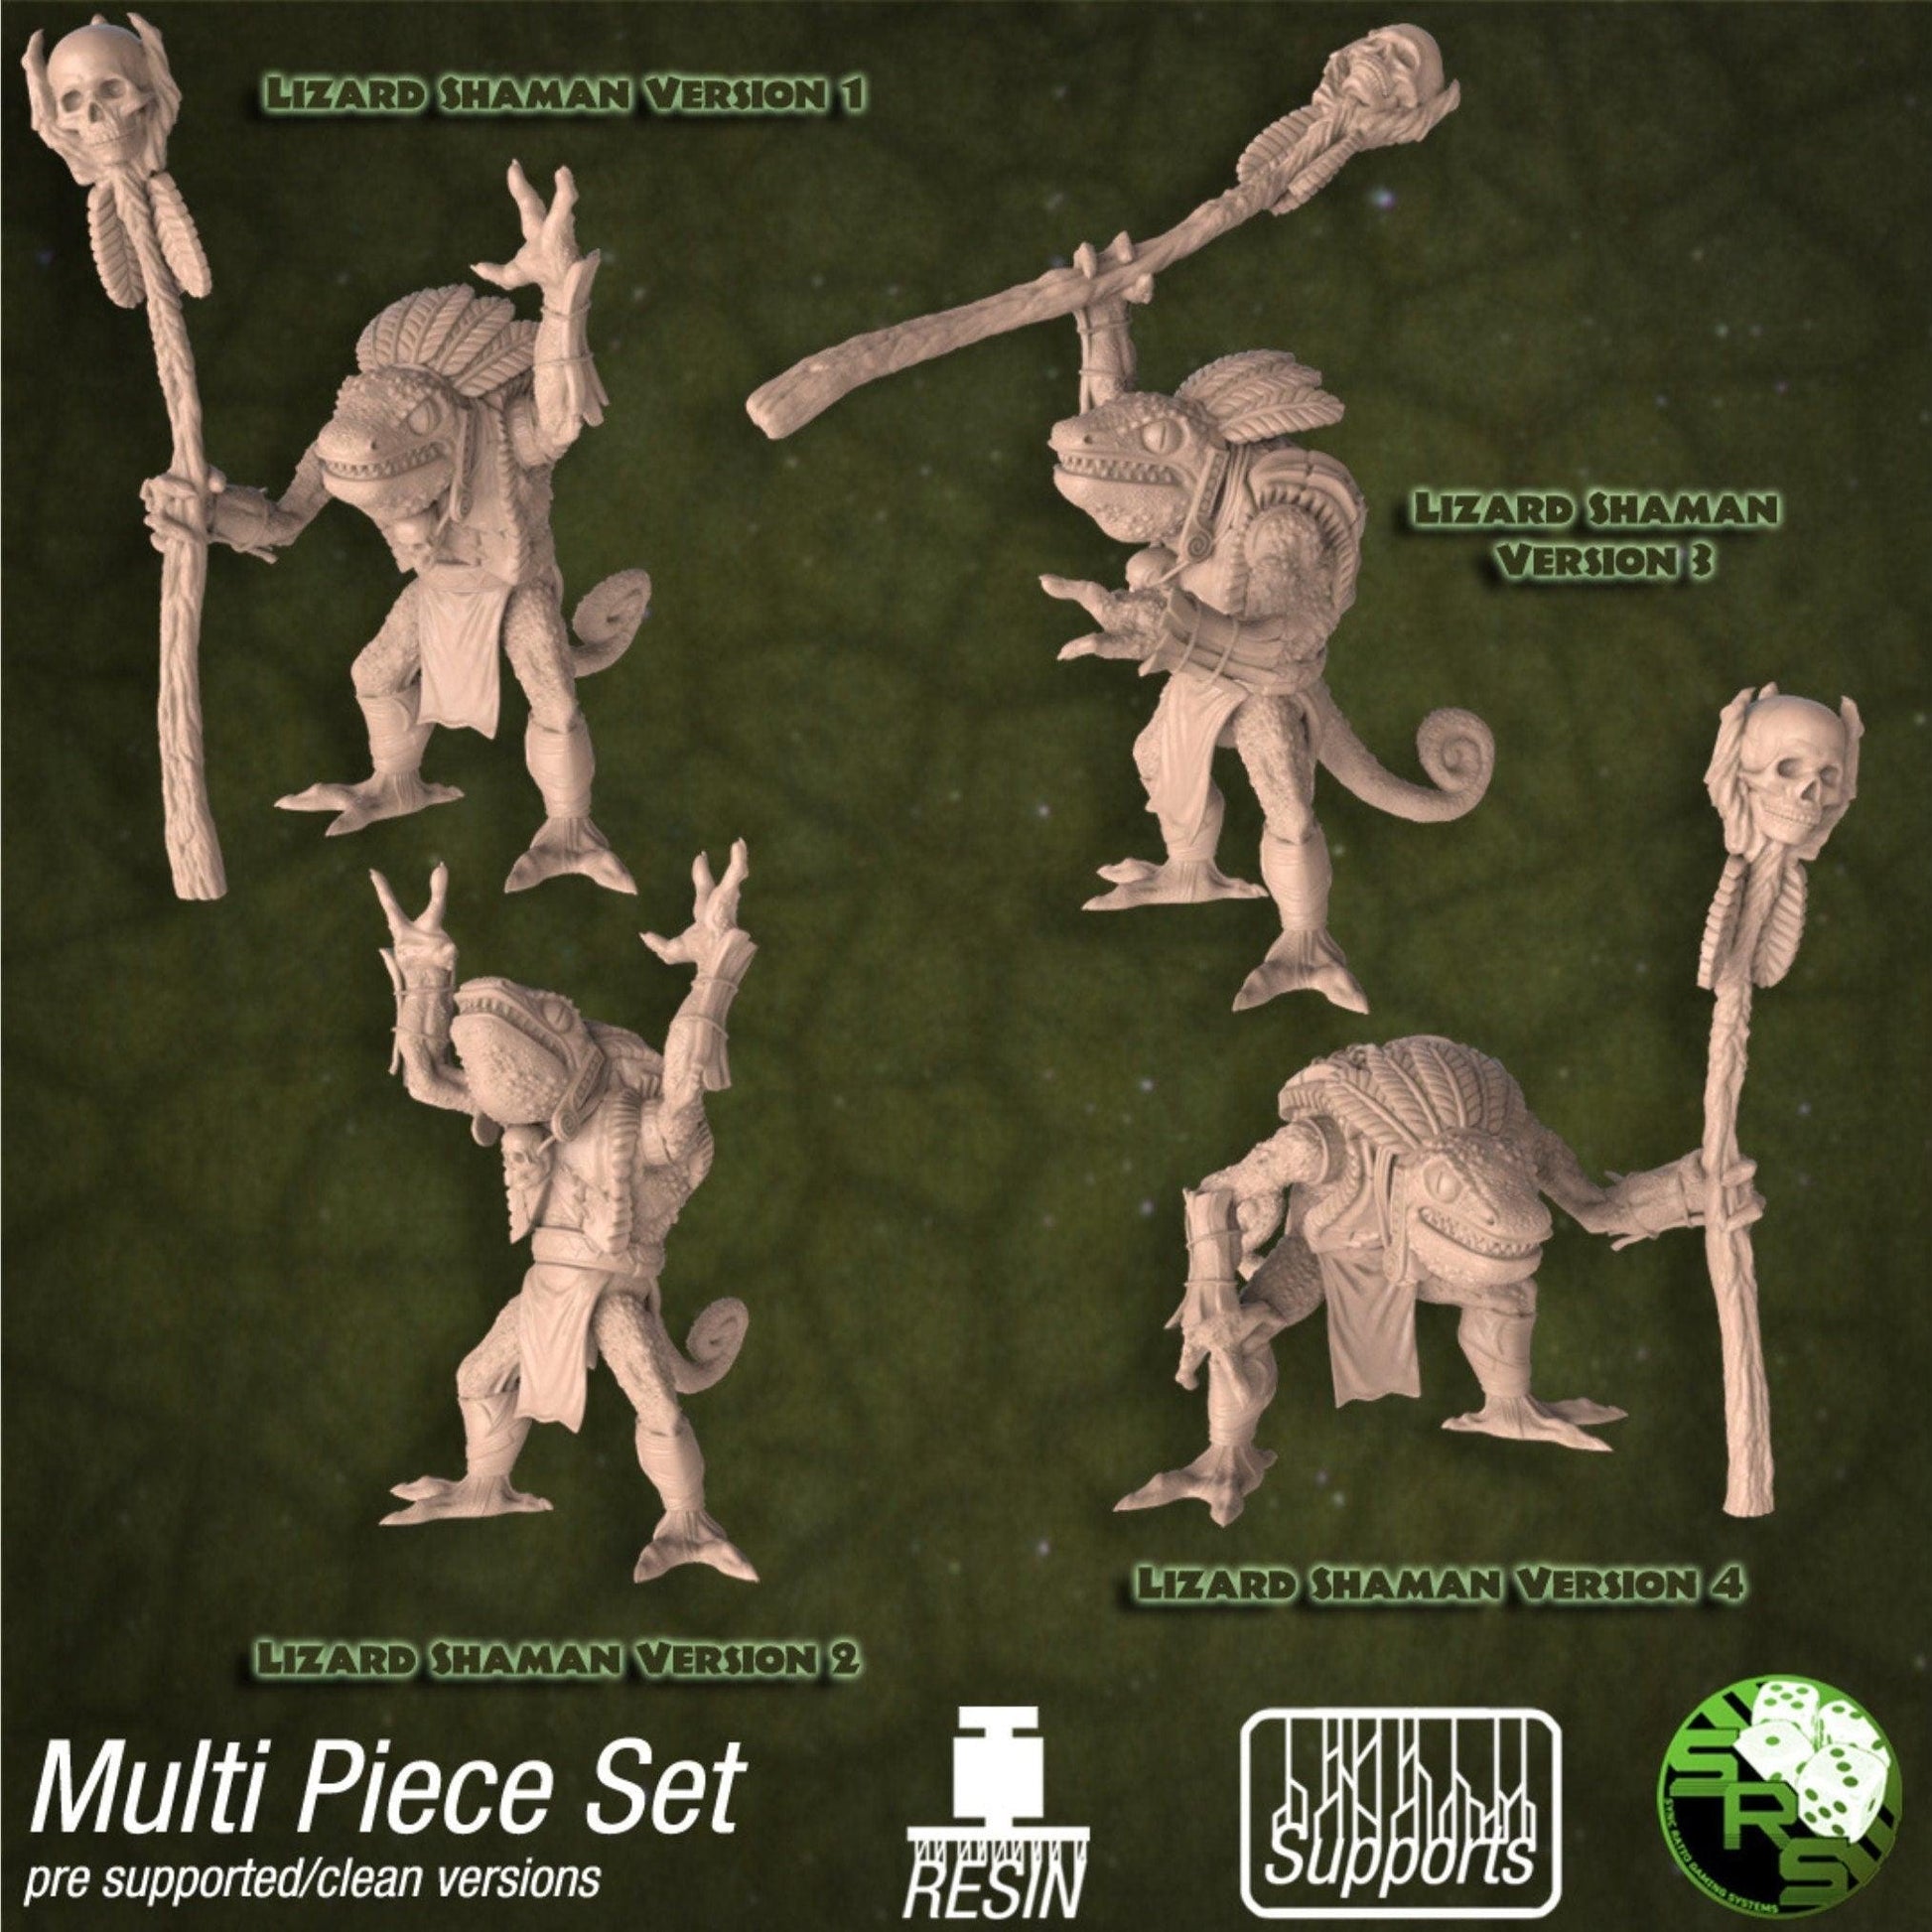 DnD Lizard Shaman - 32mm base | 32mm scale | Tabletop gaming DnD Miniature Dungeons and Dragons,dnd lizard druid - Plague Miniatures shop for DnD Miniatures